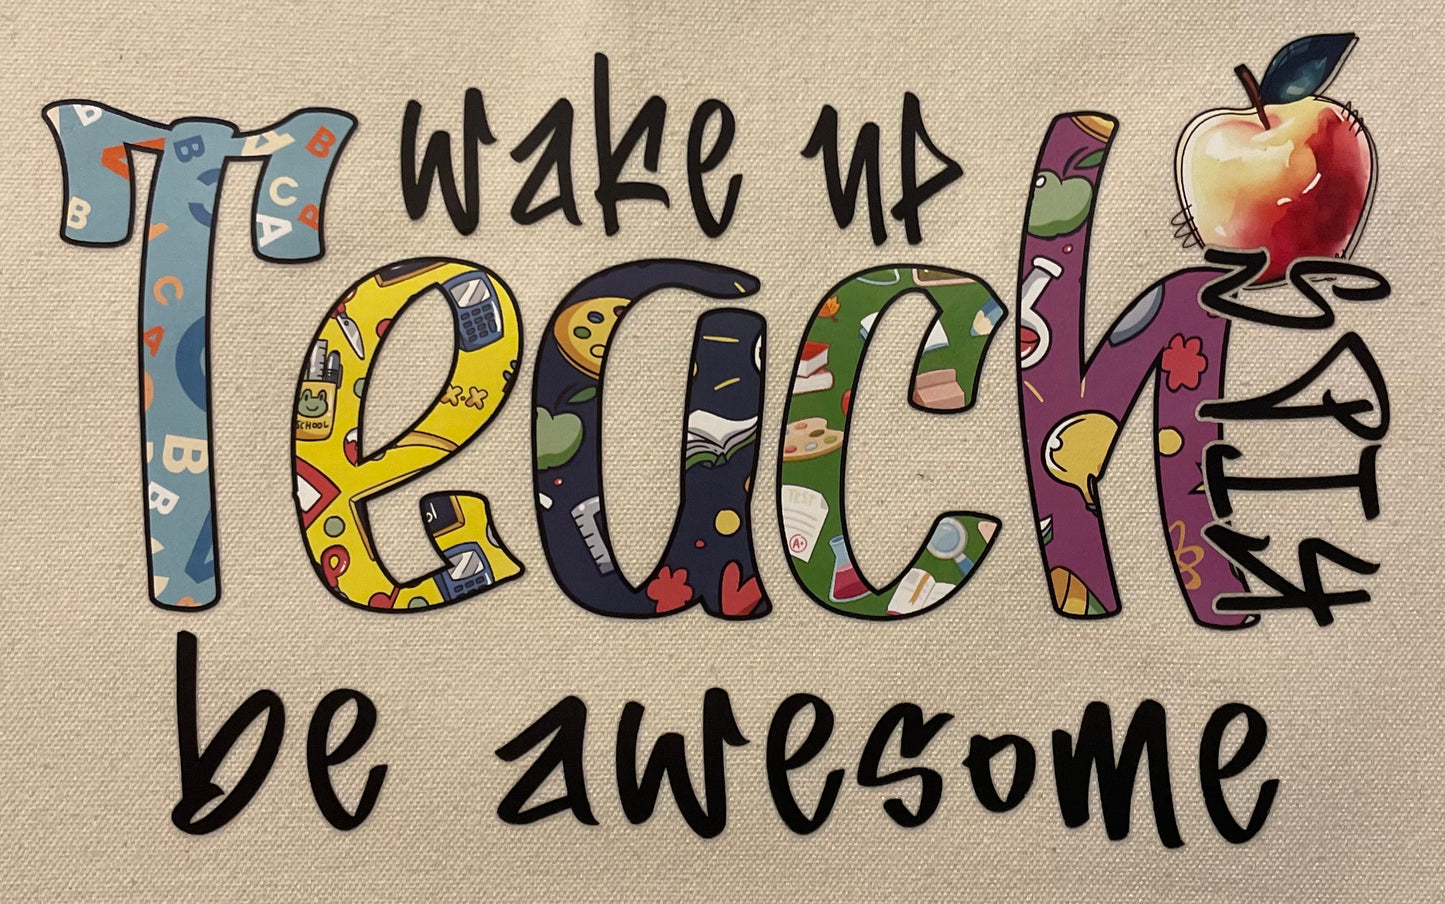 Customized Teacher Gifts, Personalized Gifts for Teachers, Teacher Gifts Canvas Tote Bag, Gifts for Teachers, Teacher’s Gift, Unique Gifts for Teachers,Wake Up Teach be Awesome